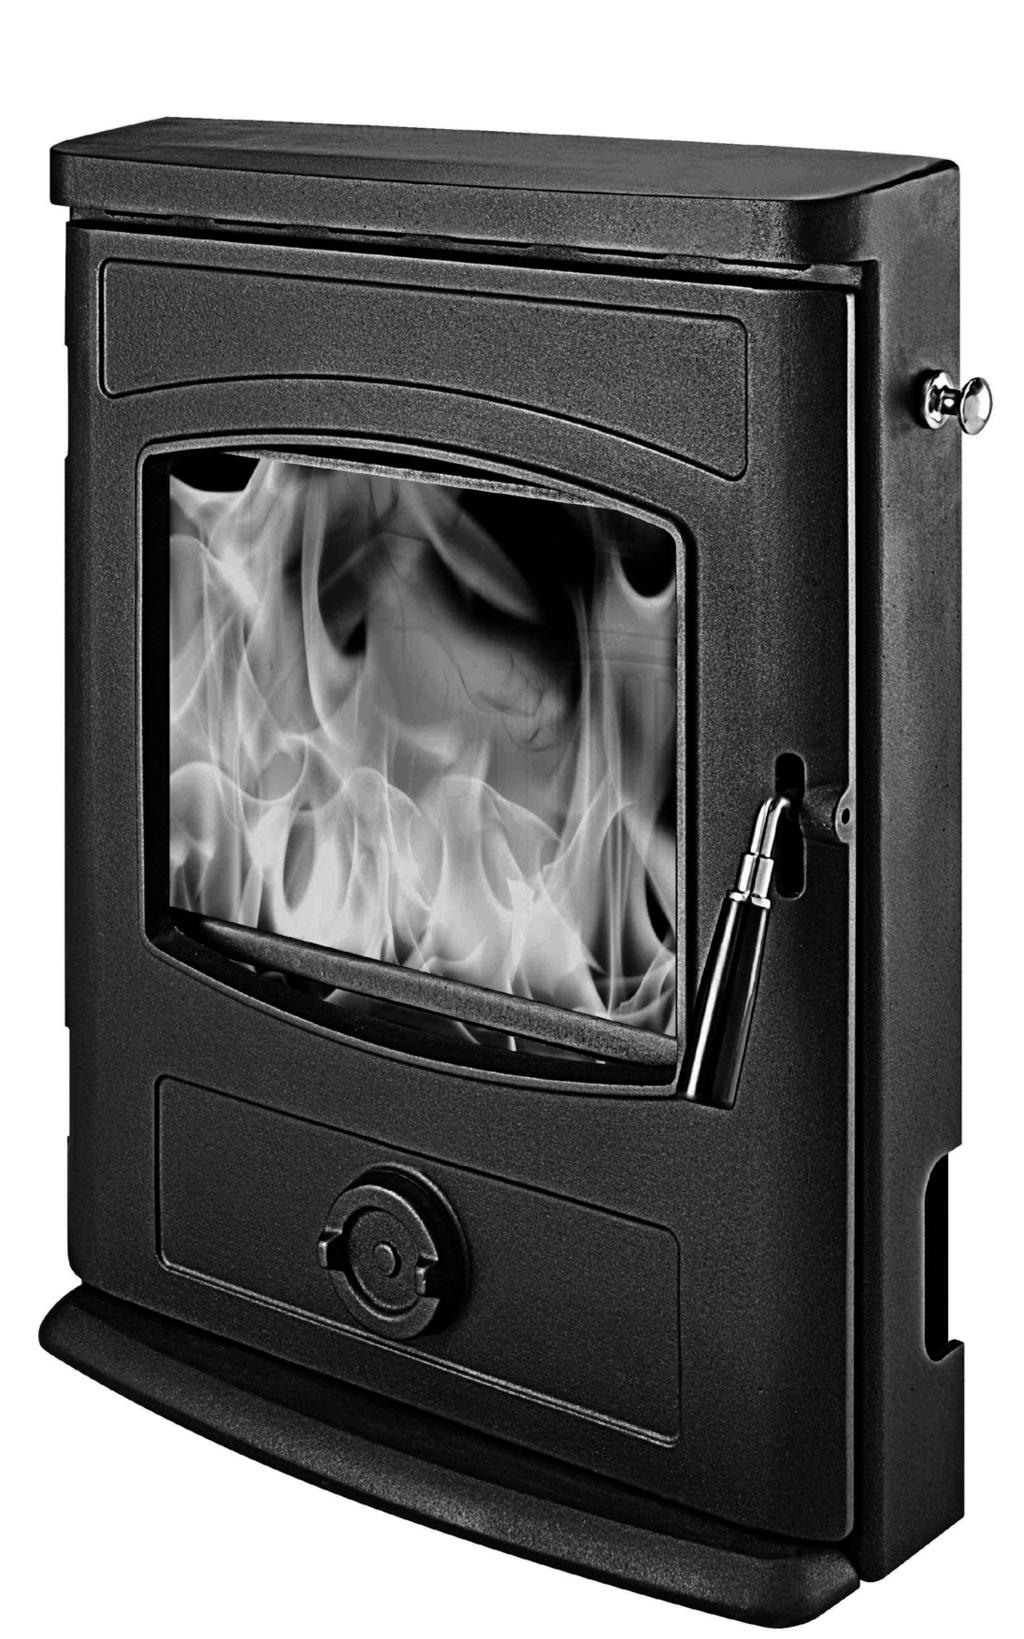 Graphite Instruction Manual Model GR357i Graphite Inset Multi Fuel and Wood Burning Non-Boiler Inset Stove Published June 2013 Please note This appliance has been independently CE tested and approved